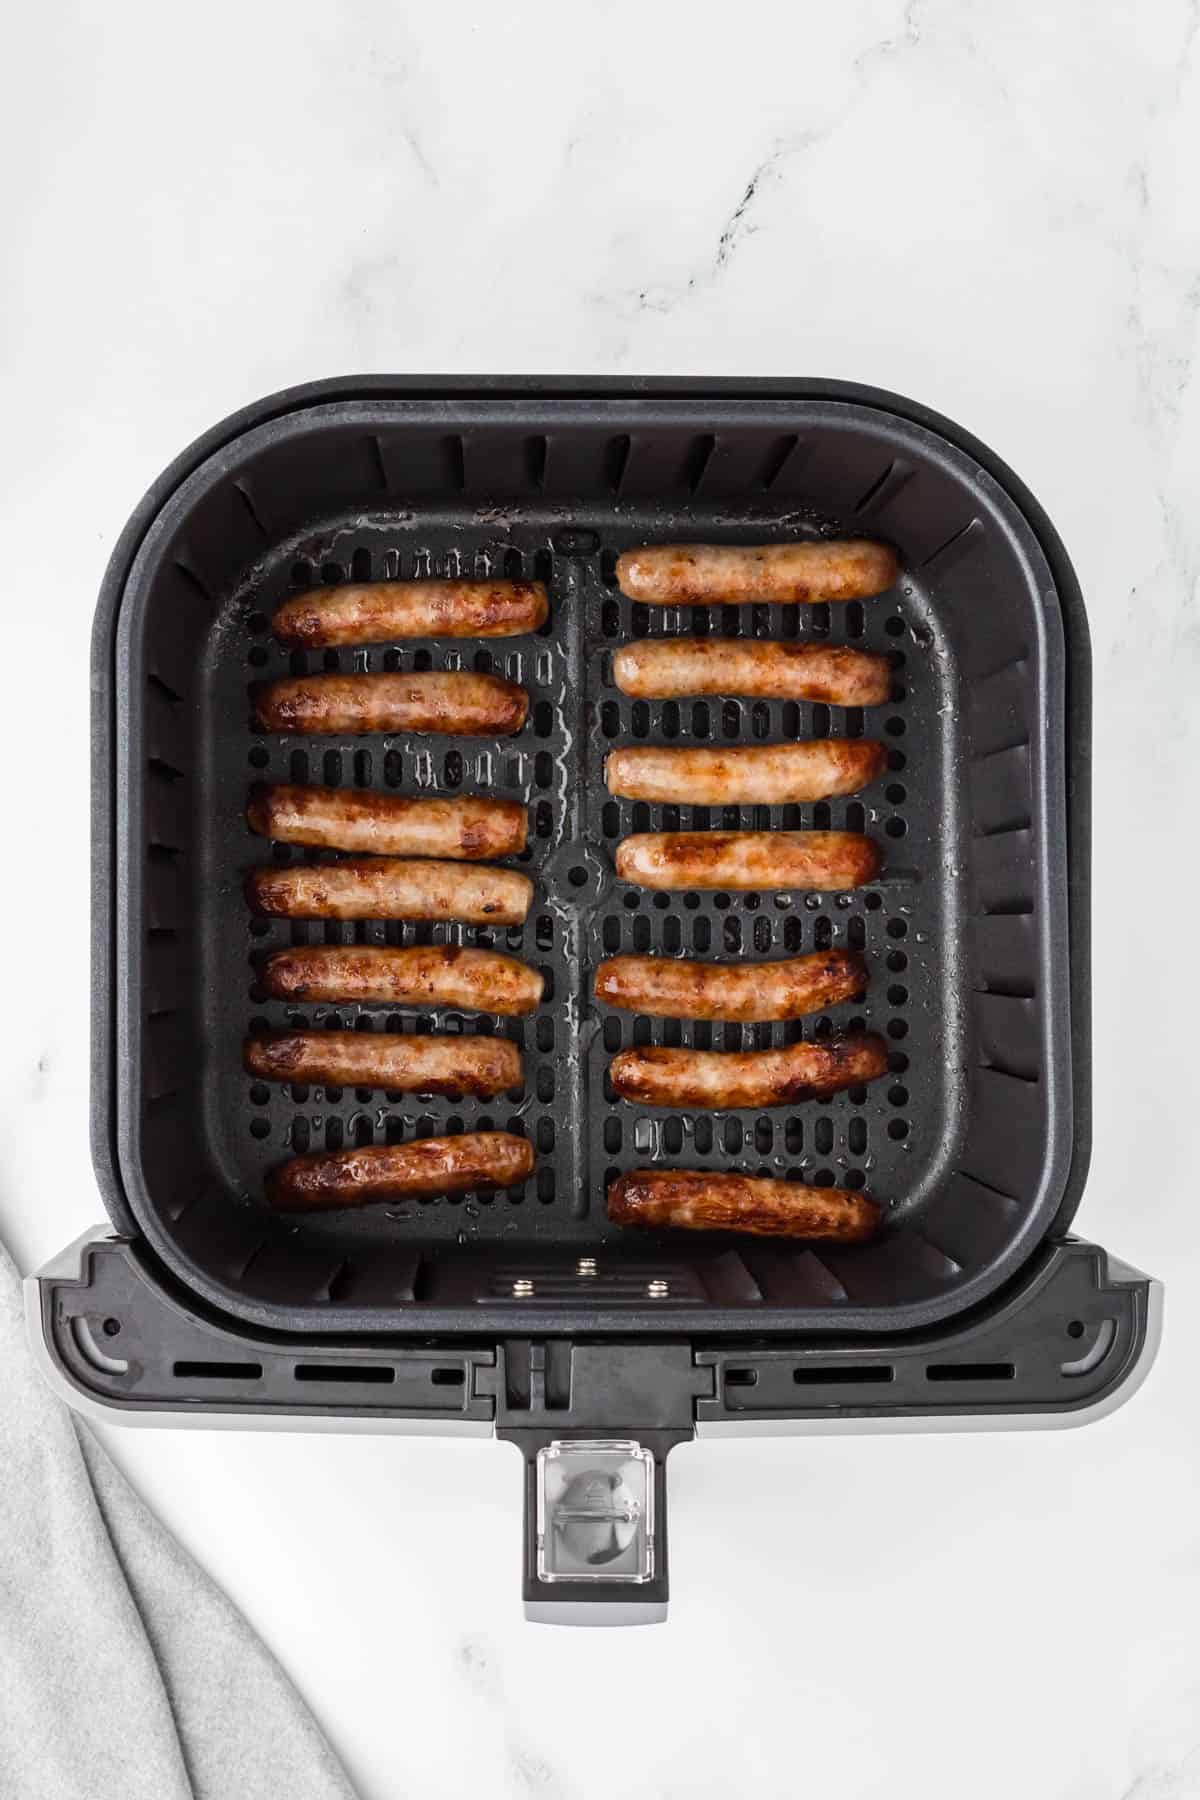 Cooked breakfast sausage links in an air fryer.